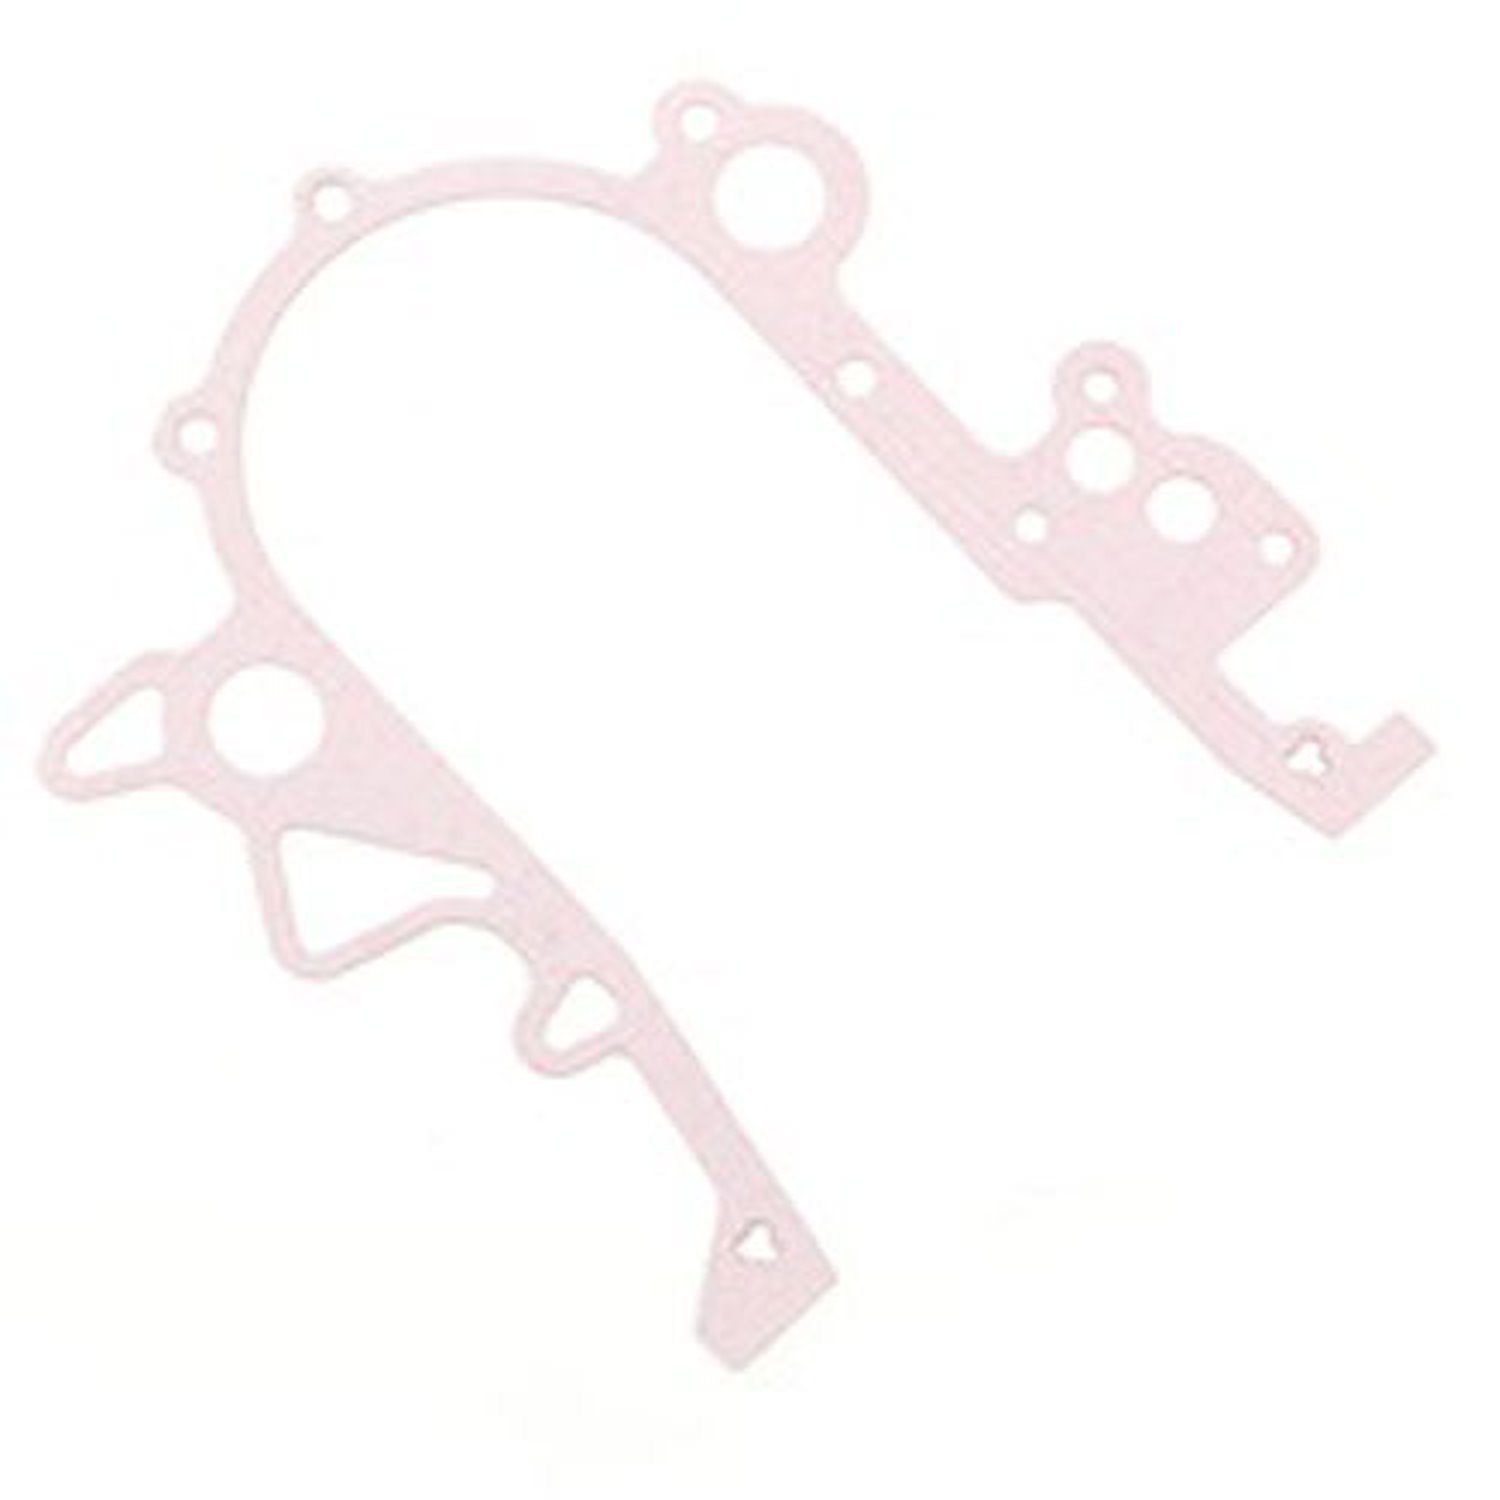 This timing cover gasket from Omix-ADA fits 3.8L engines found in 07-11 Jeep Wranglers.